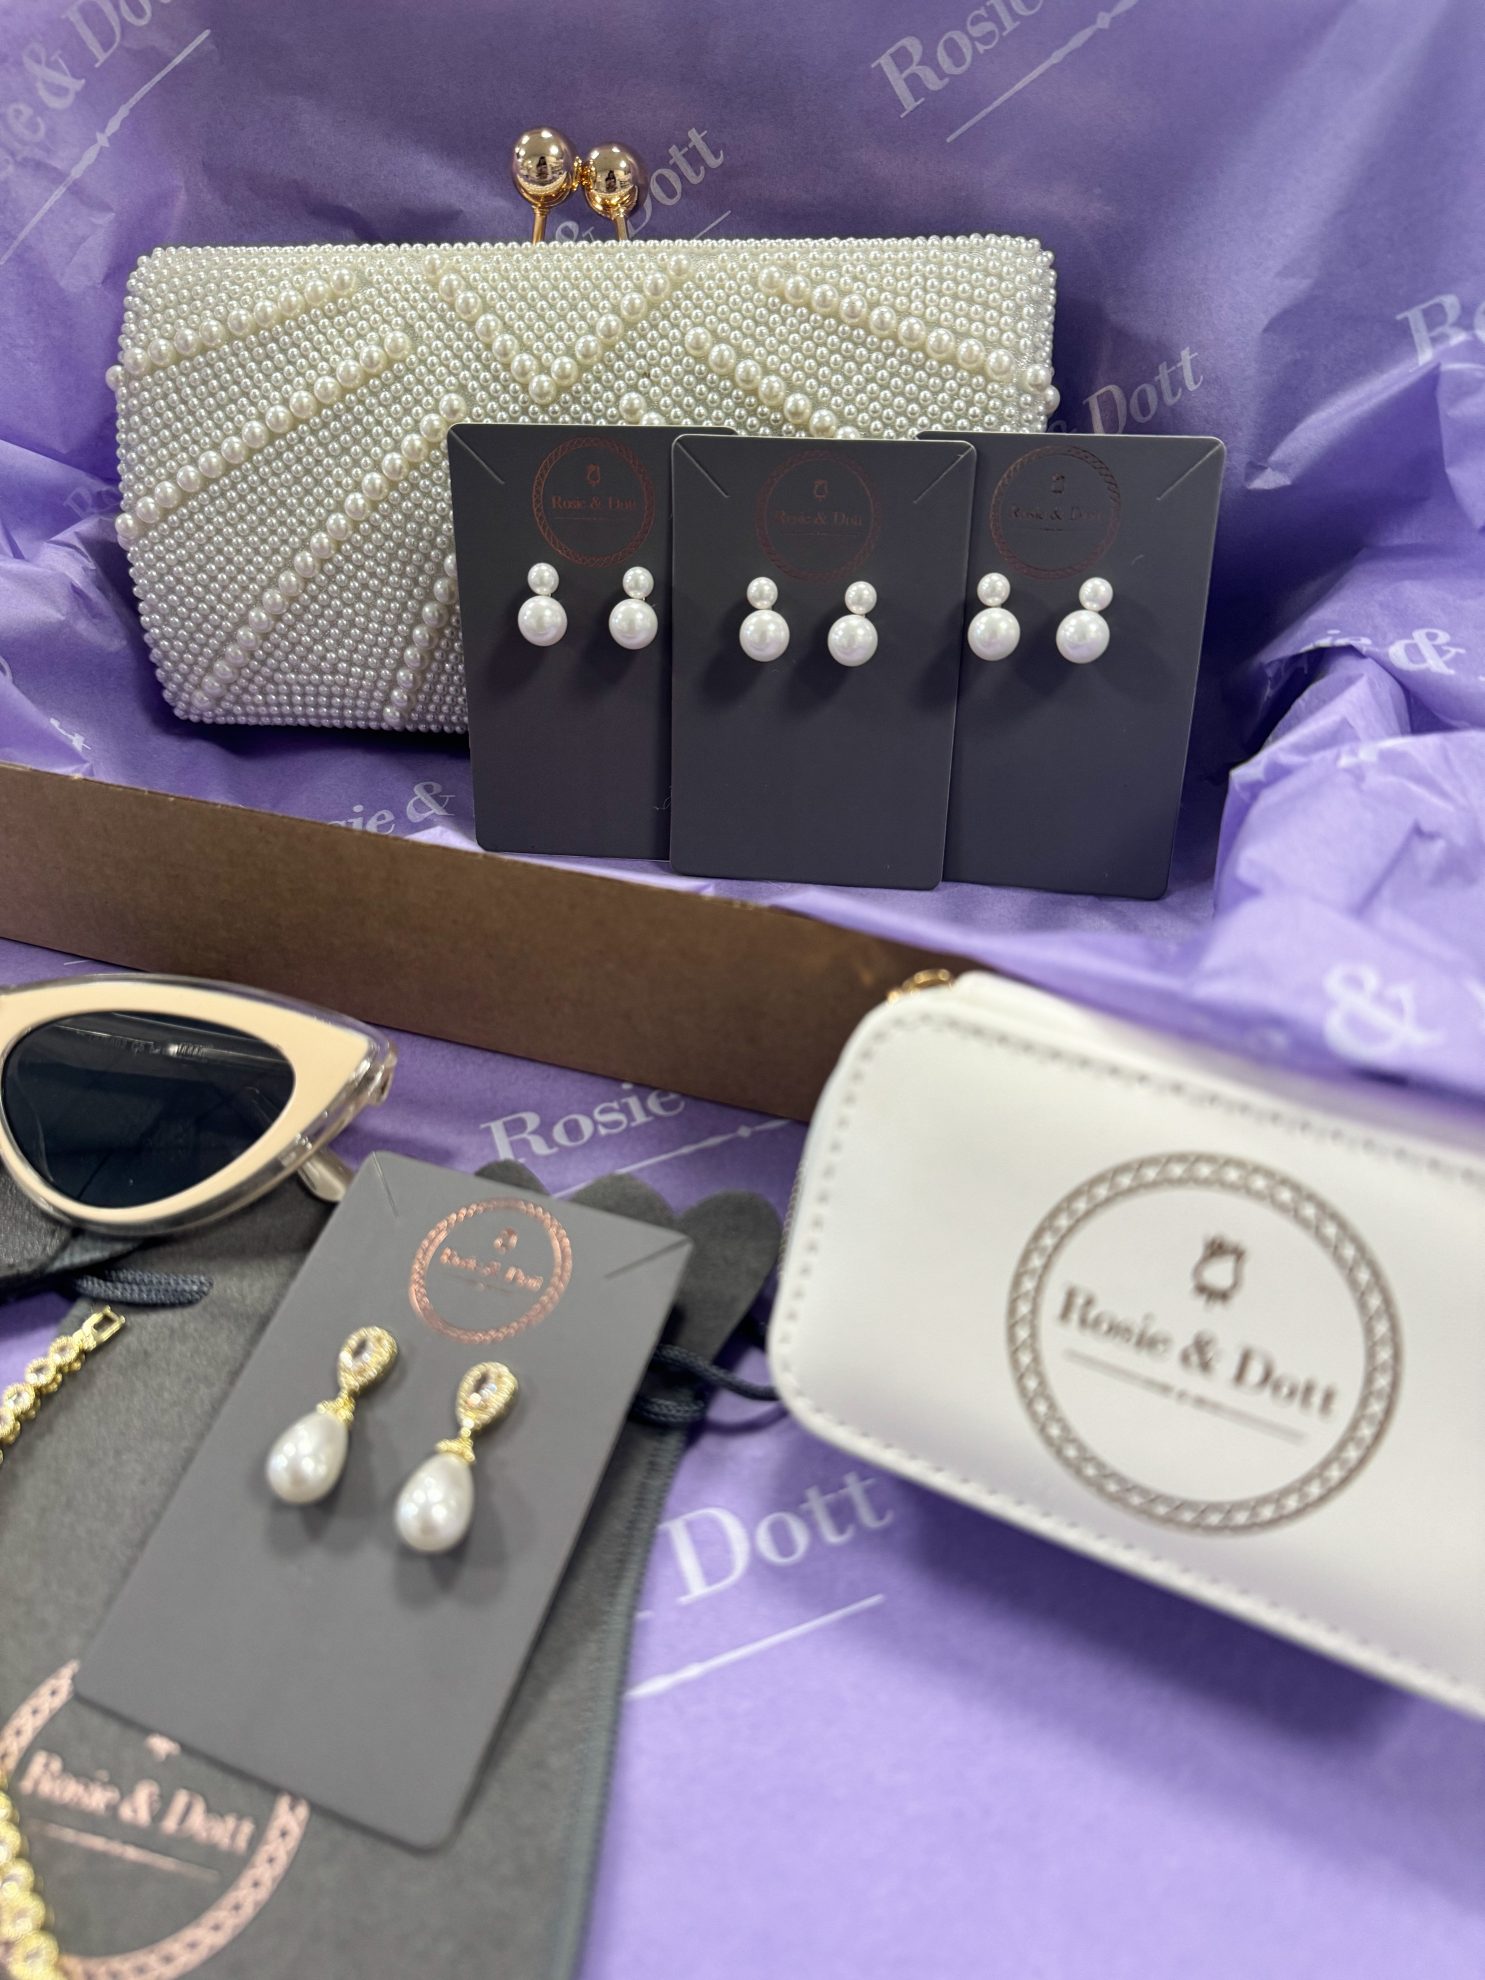 Accessory Competition Prize from Rosie & Dott